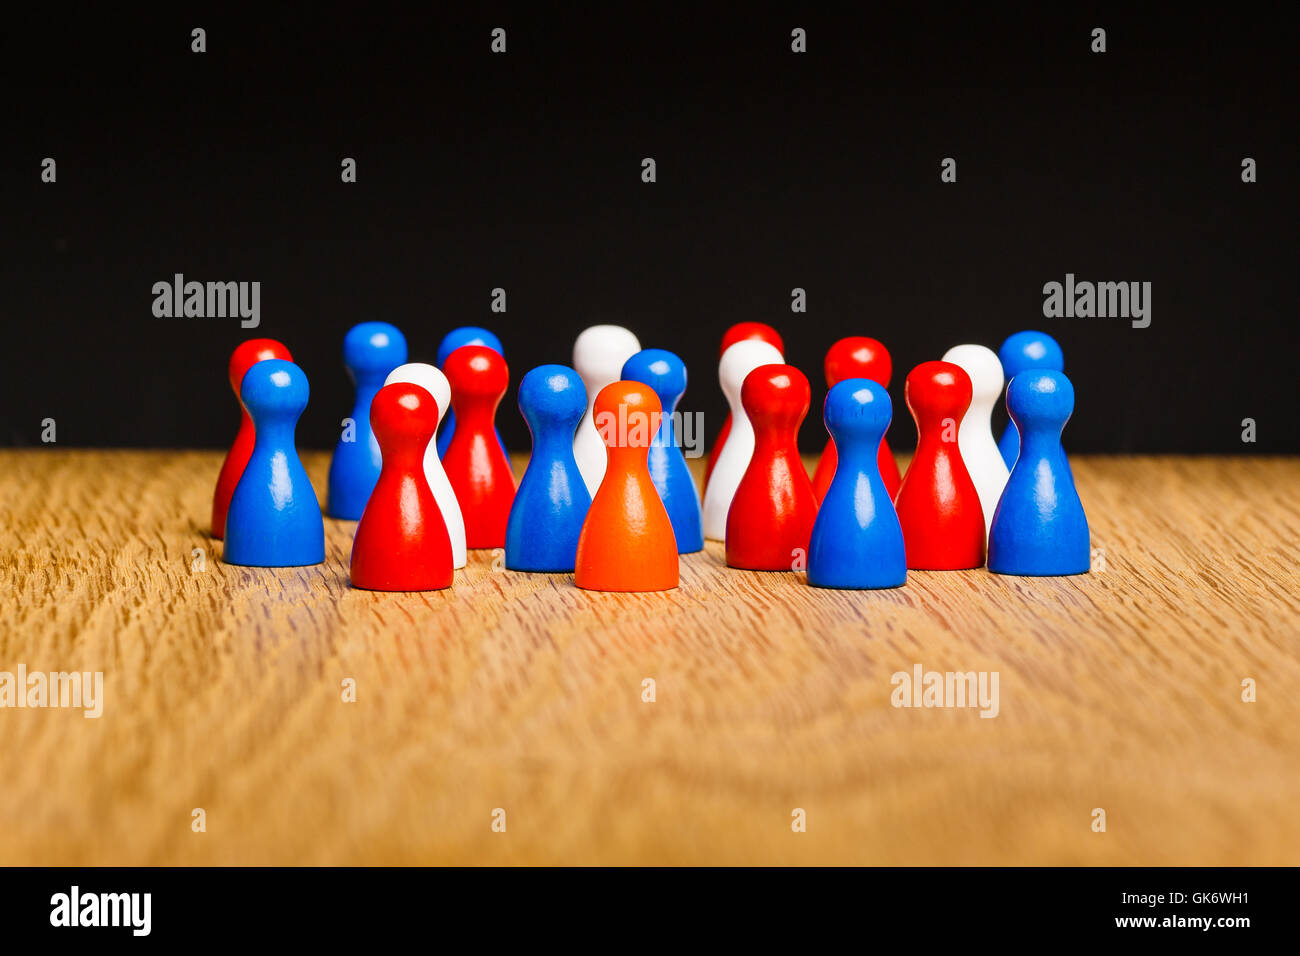 Concept for kingdom of The Netherlands. Orange king amongst red white blue pawns representing the people. Stock Photo